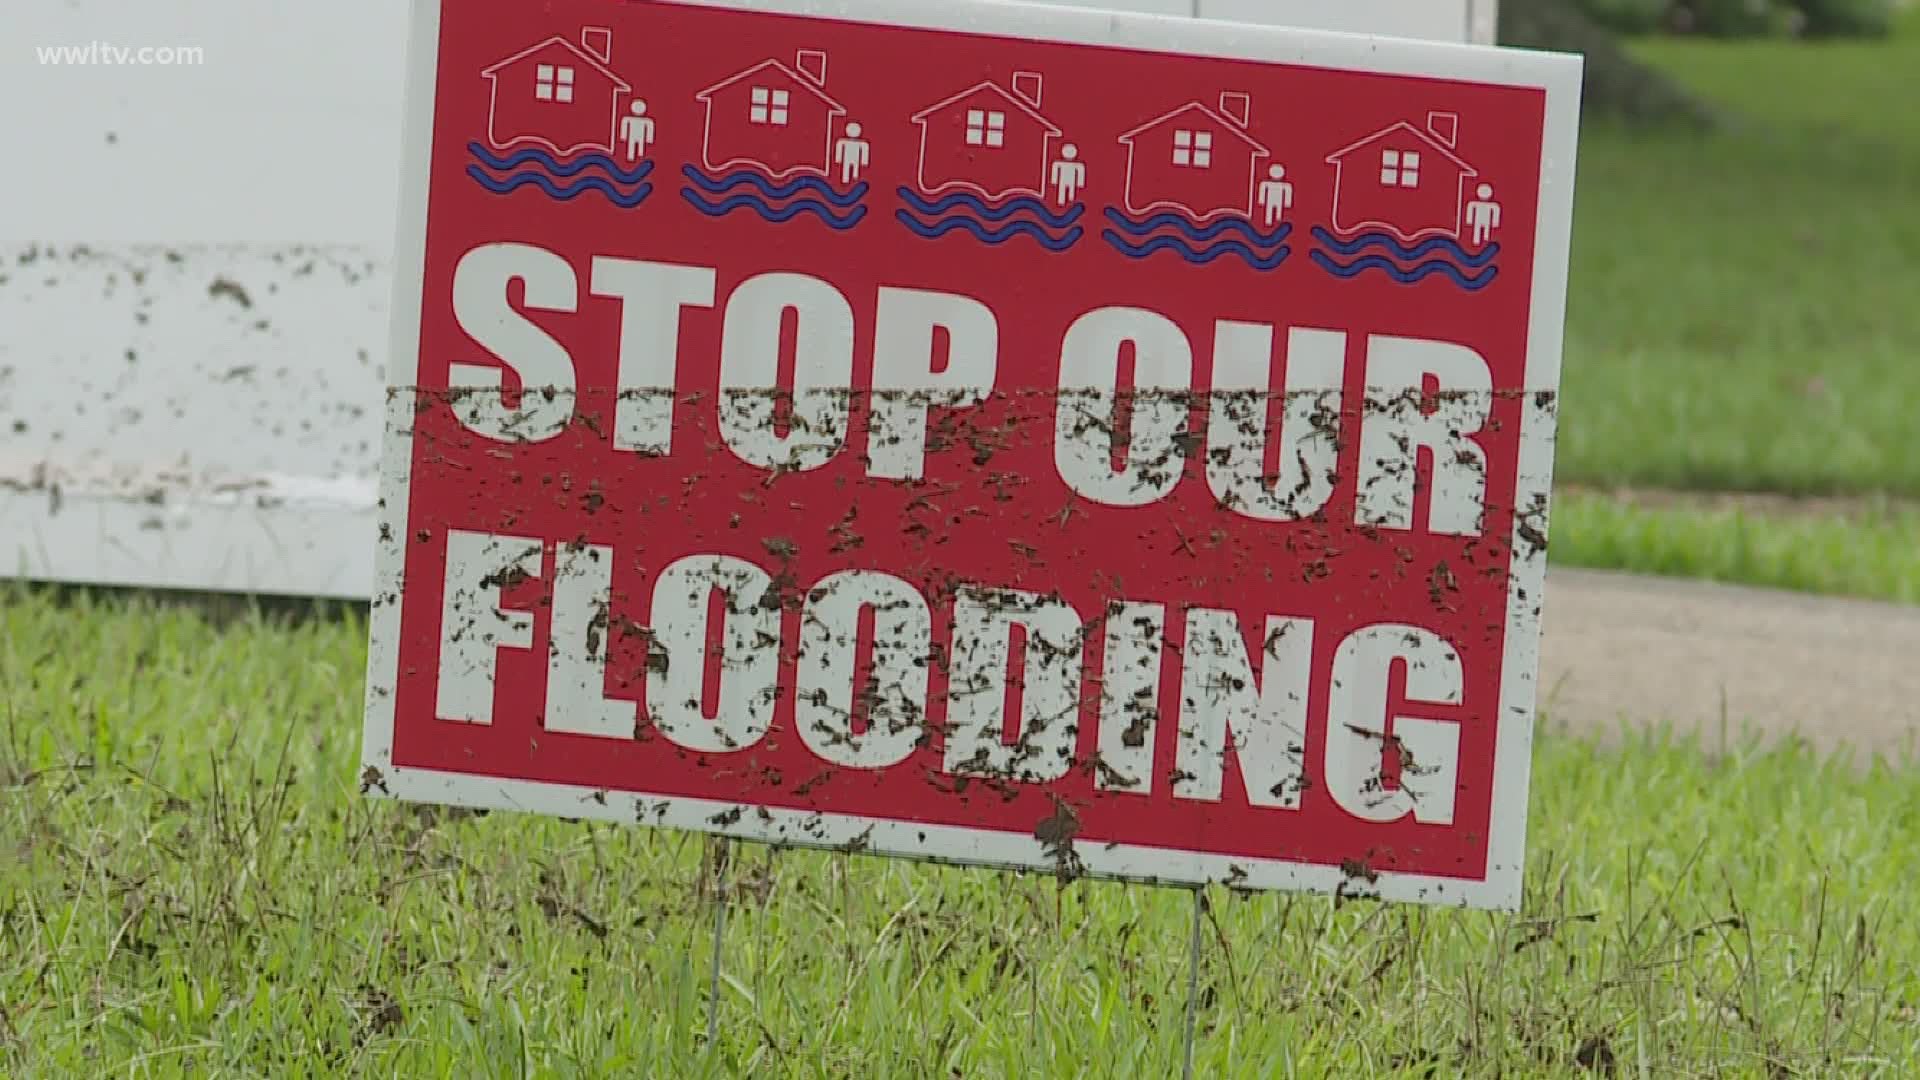 Several inches of rain in Destrehan Sunday led to a recurring problem - flooding in the streets, some of which got into homes.